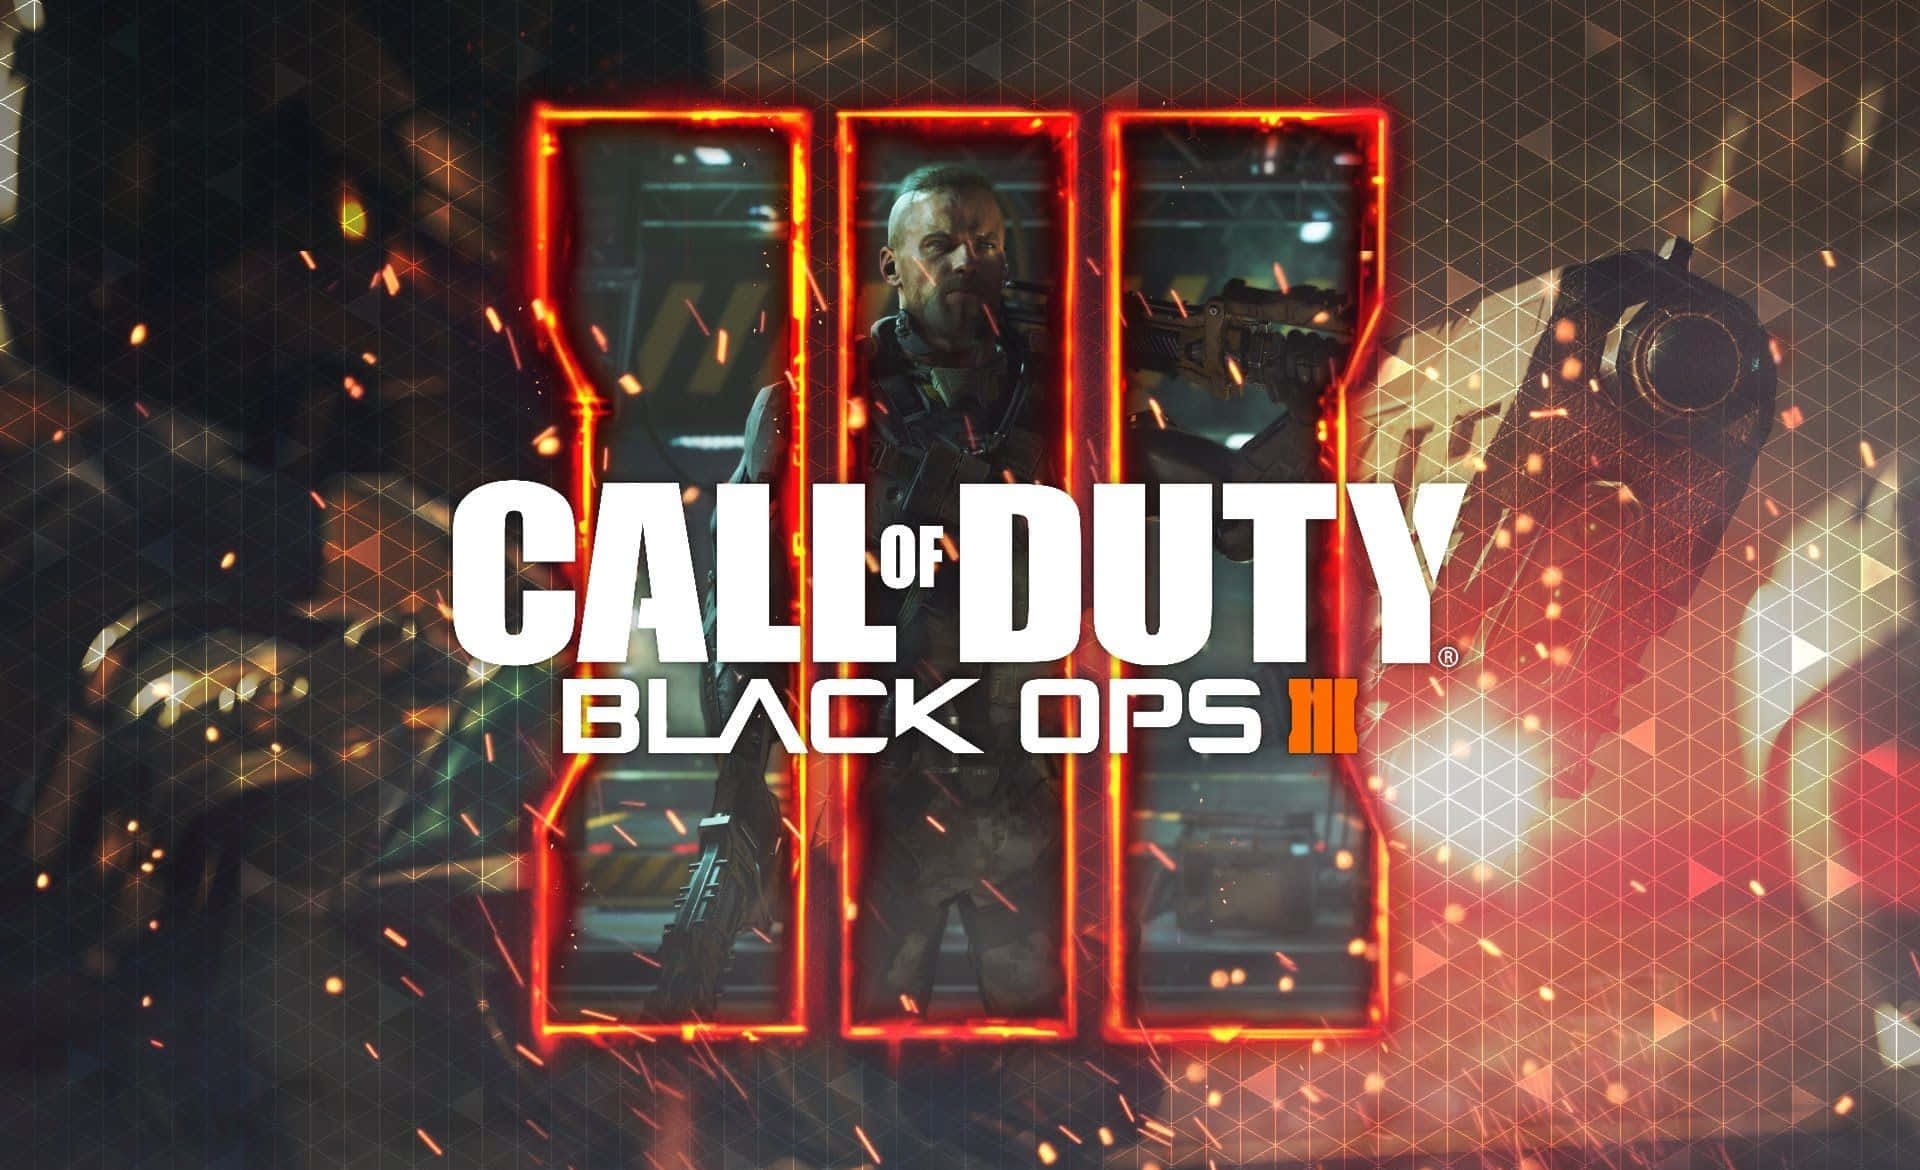 "Call of Duty: Black Ops 3" Wallpaper